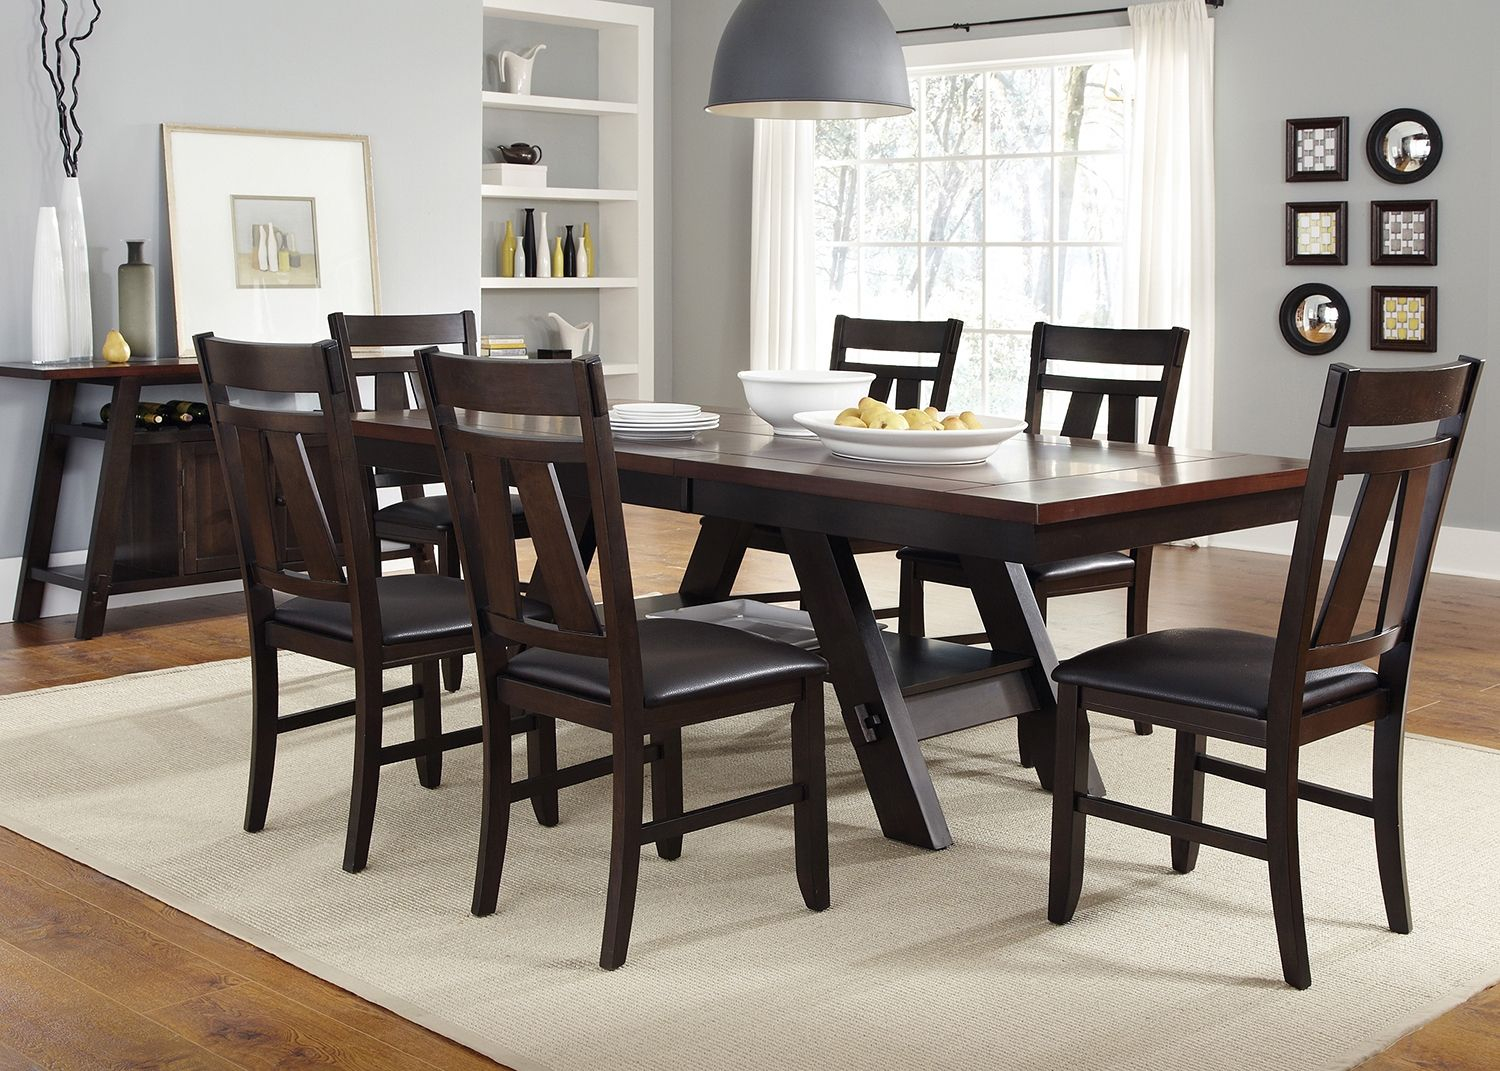 Lawson Dining Room Collection Leons Casual Dining Rooms in dimensions 1500 X 1071